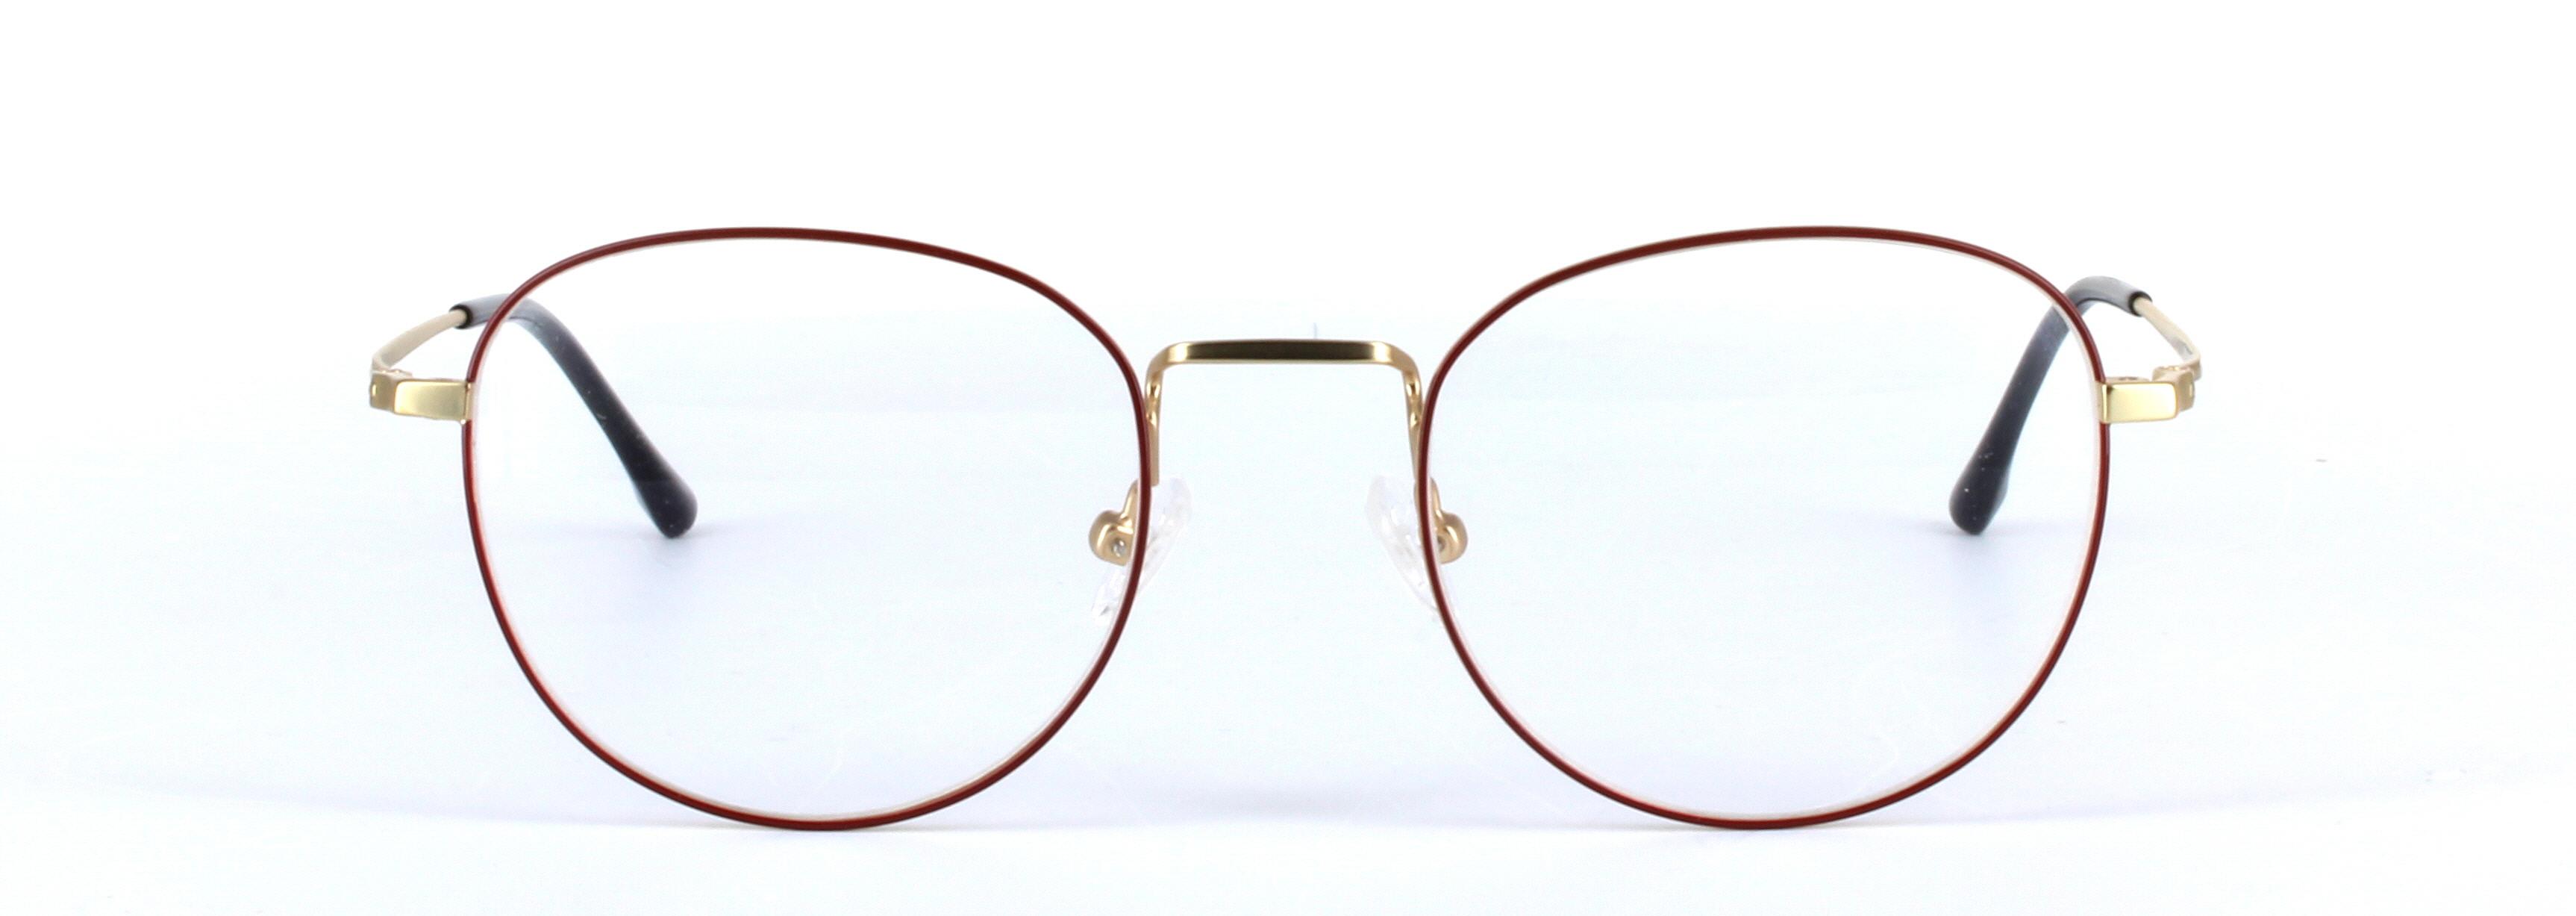 Milan Red and Gold Full Rim Round Metal Glasses - Image View 5